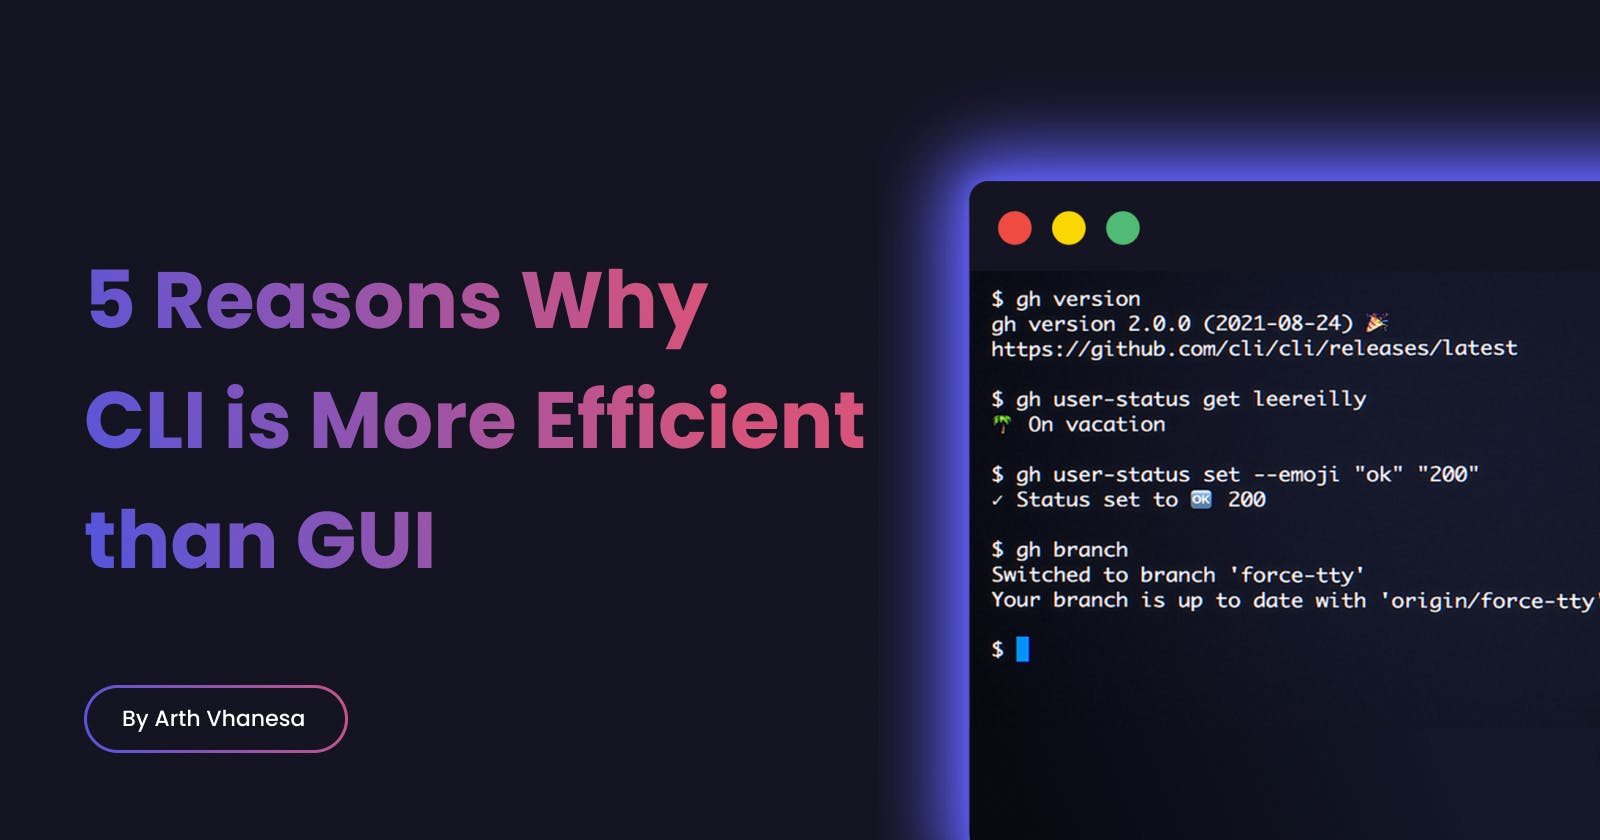 5 Reasons Why Command Line Interface (CLI) is More Efficient Than GUI